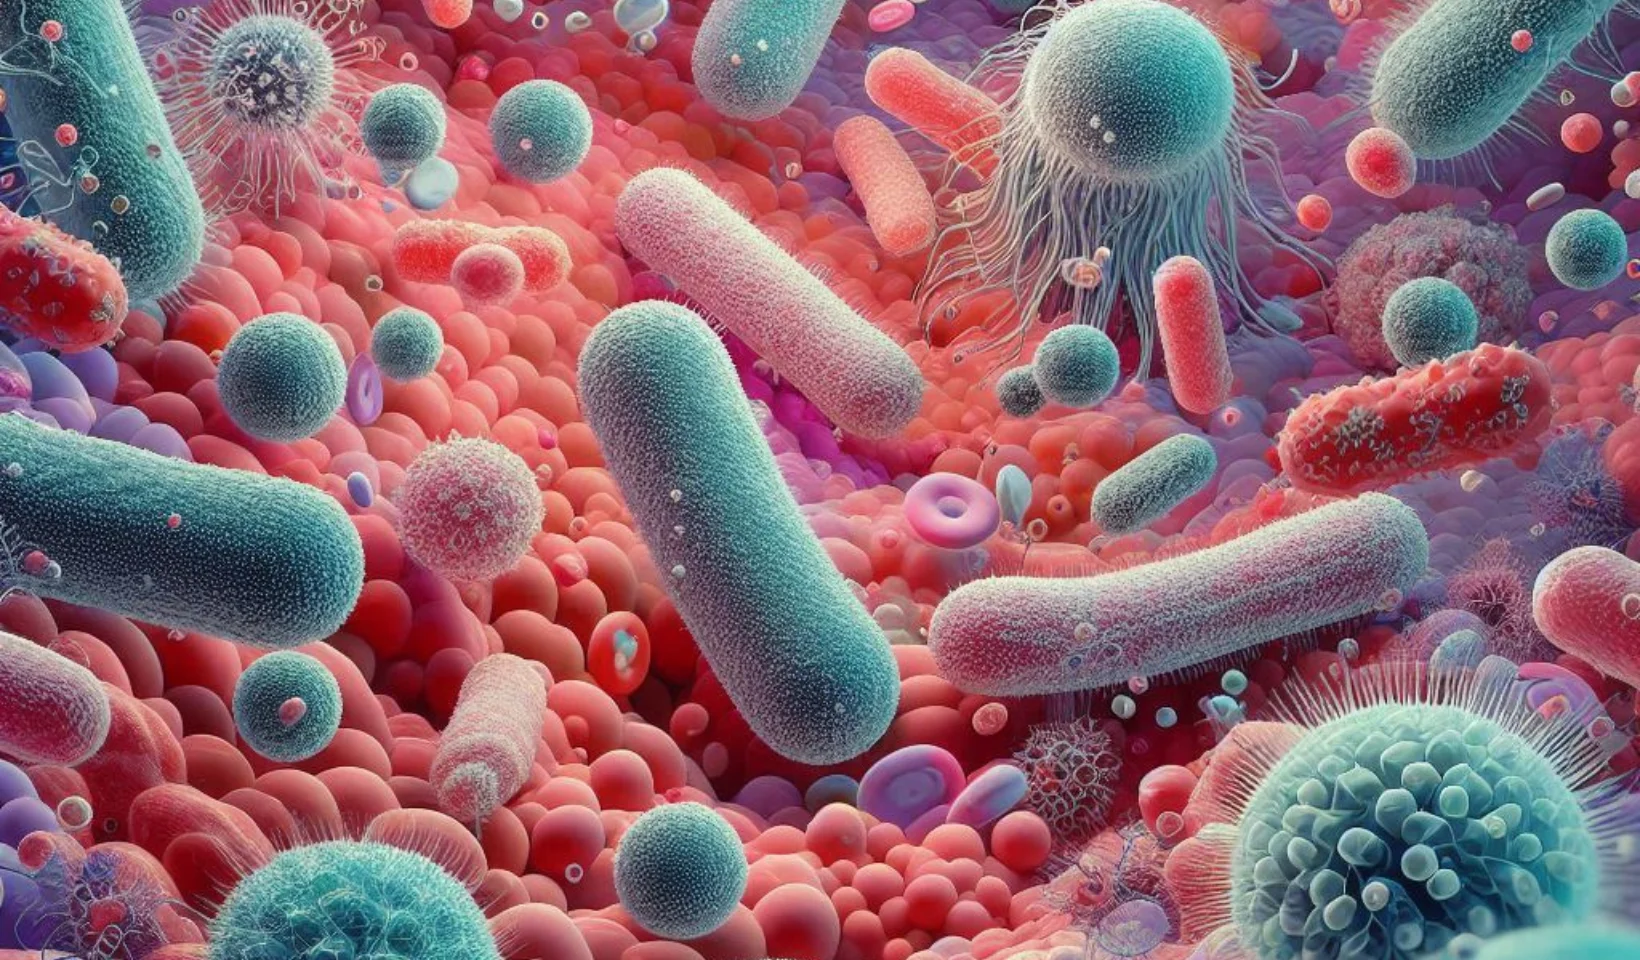 Urgent Antibiotic Resistance and Winning the War Against It (20)